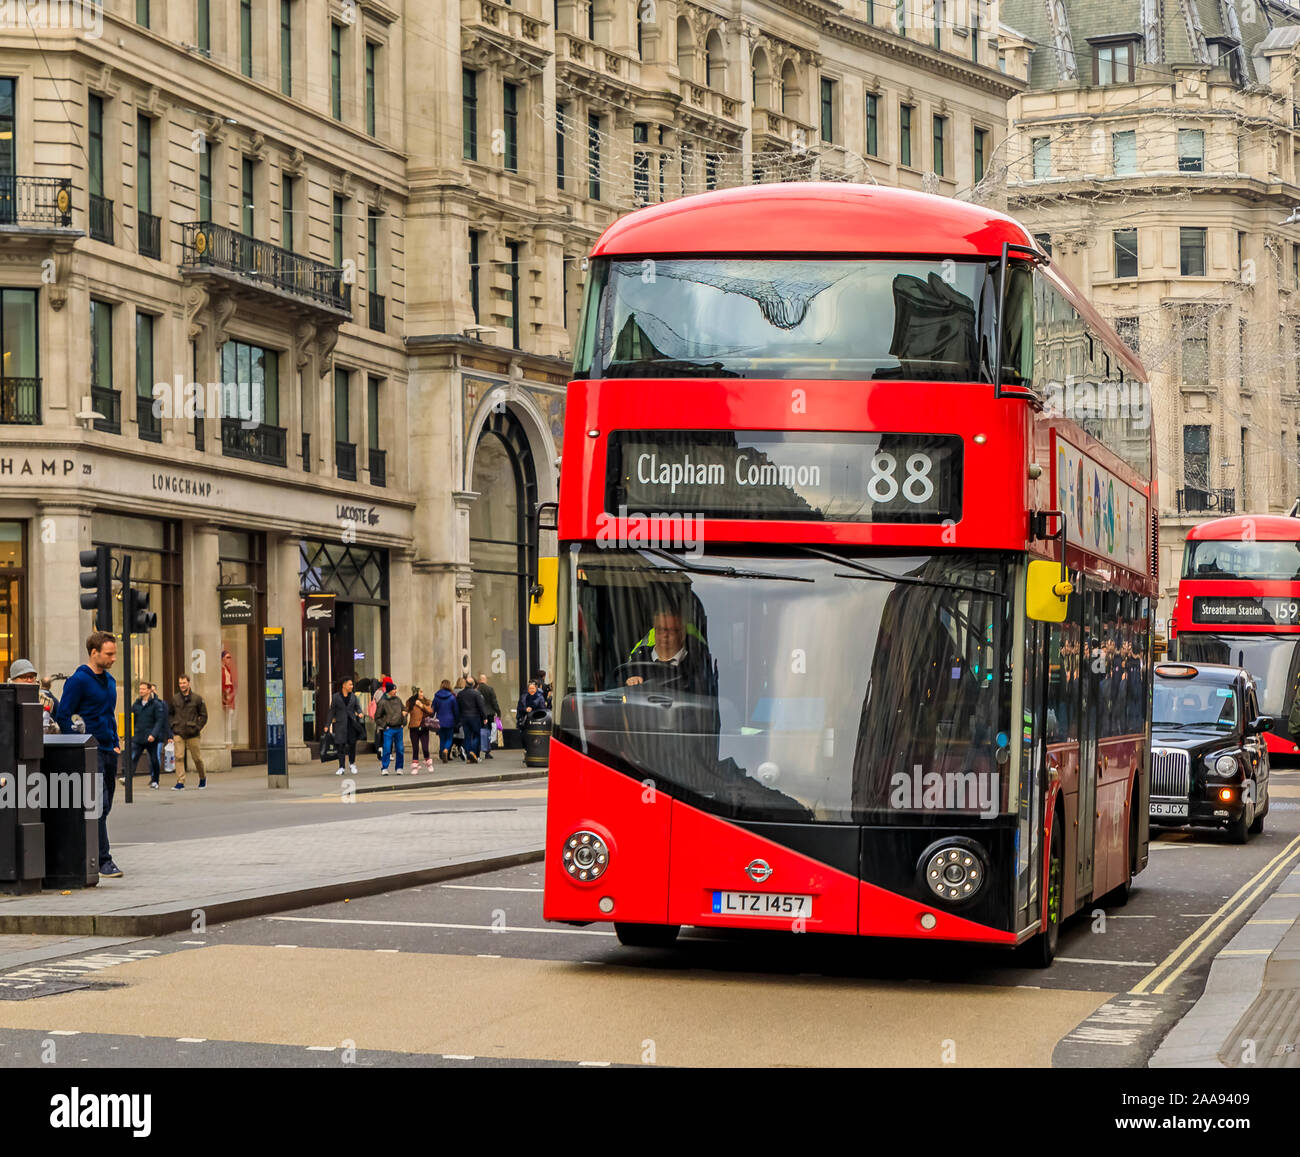 London, United Kingdom - January 13, 2018: Luxury stores on Regent street with people passing by and a double decker red buss on the road Stock Photo